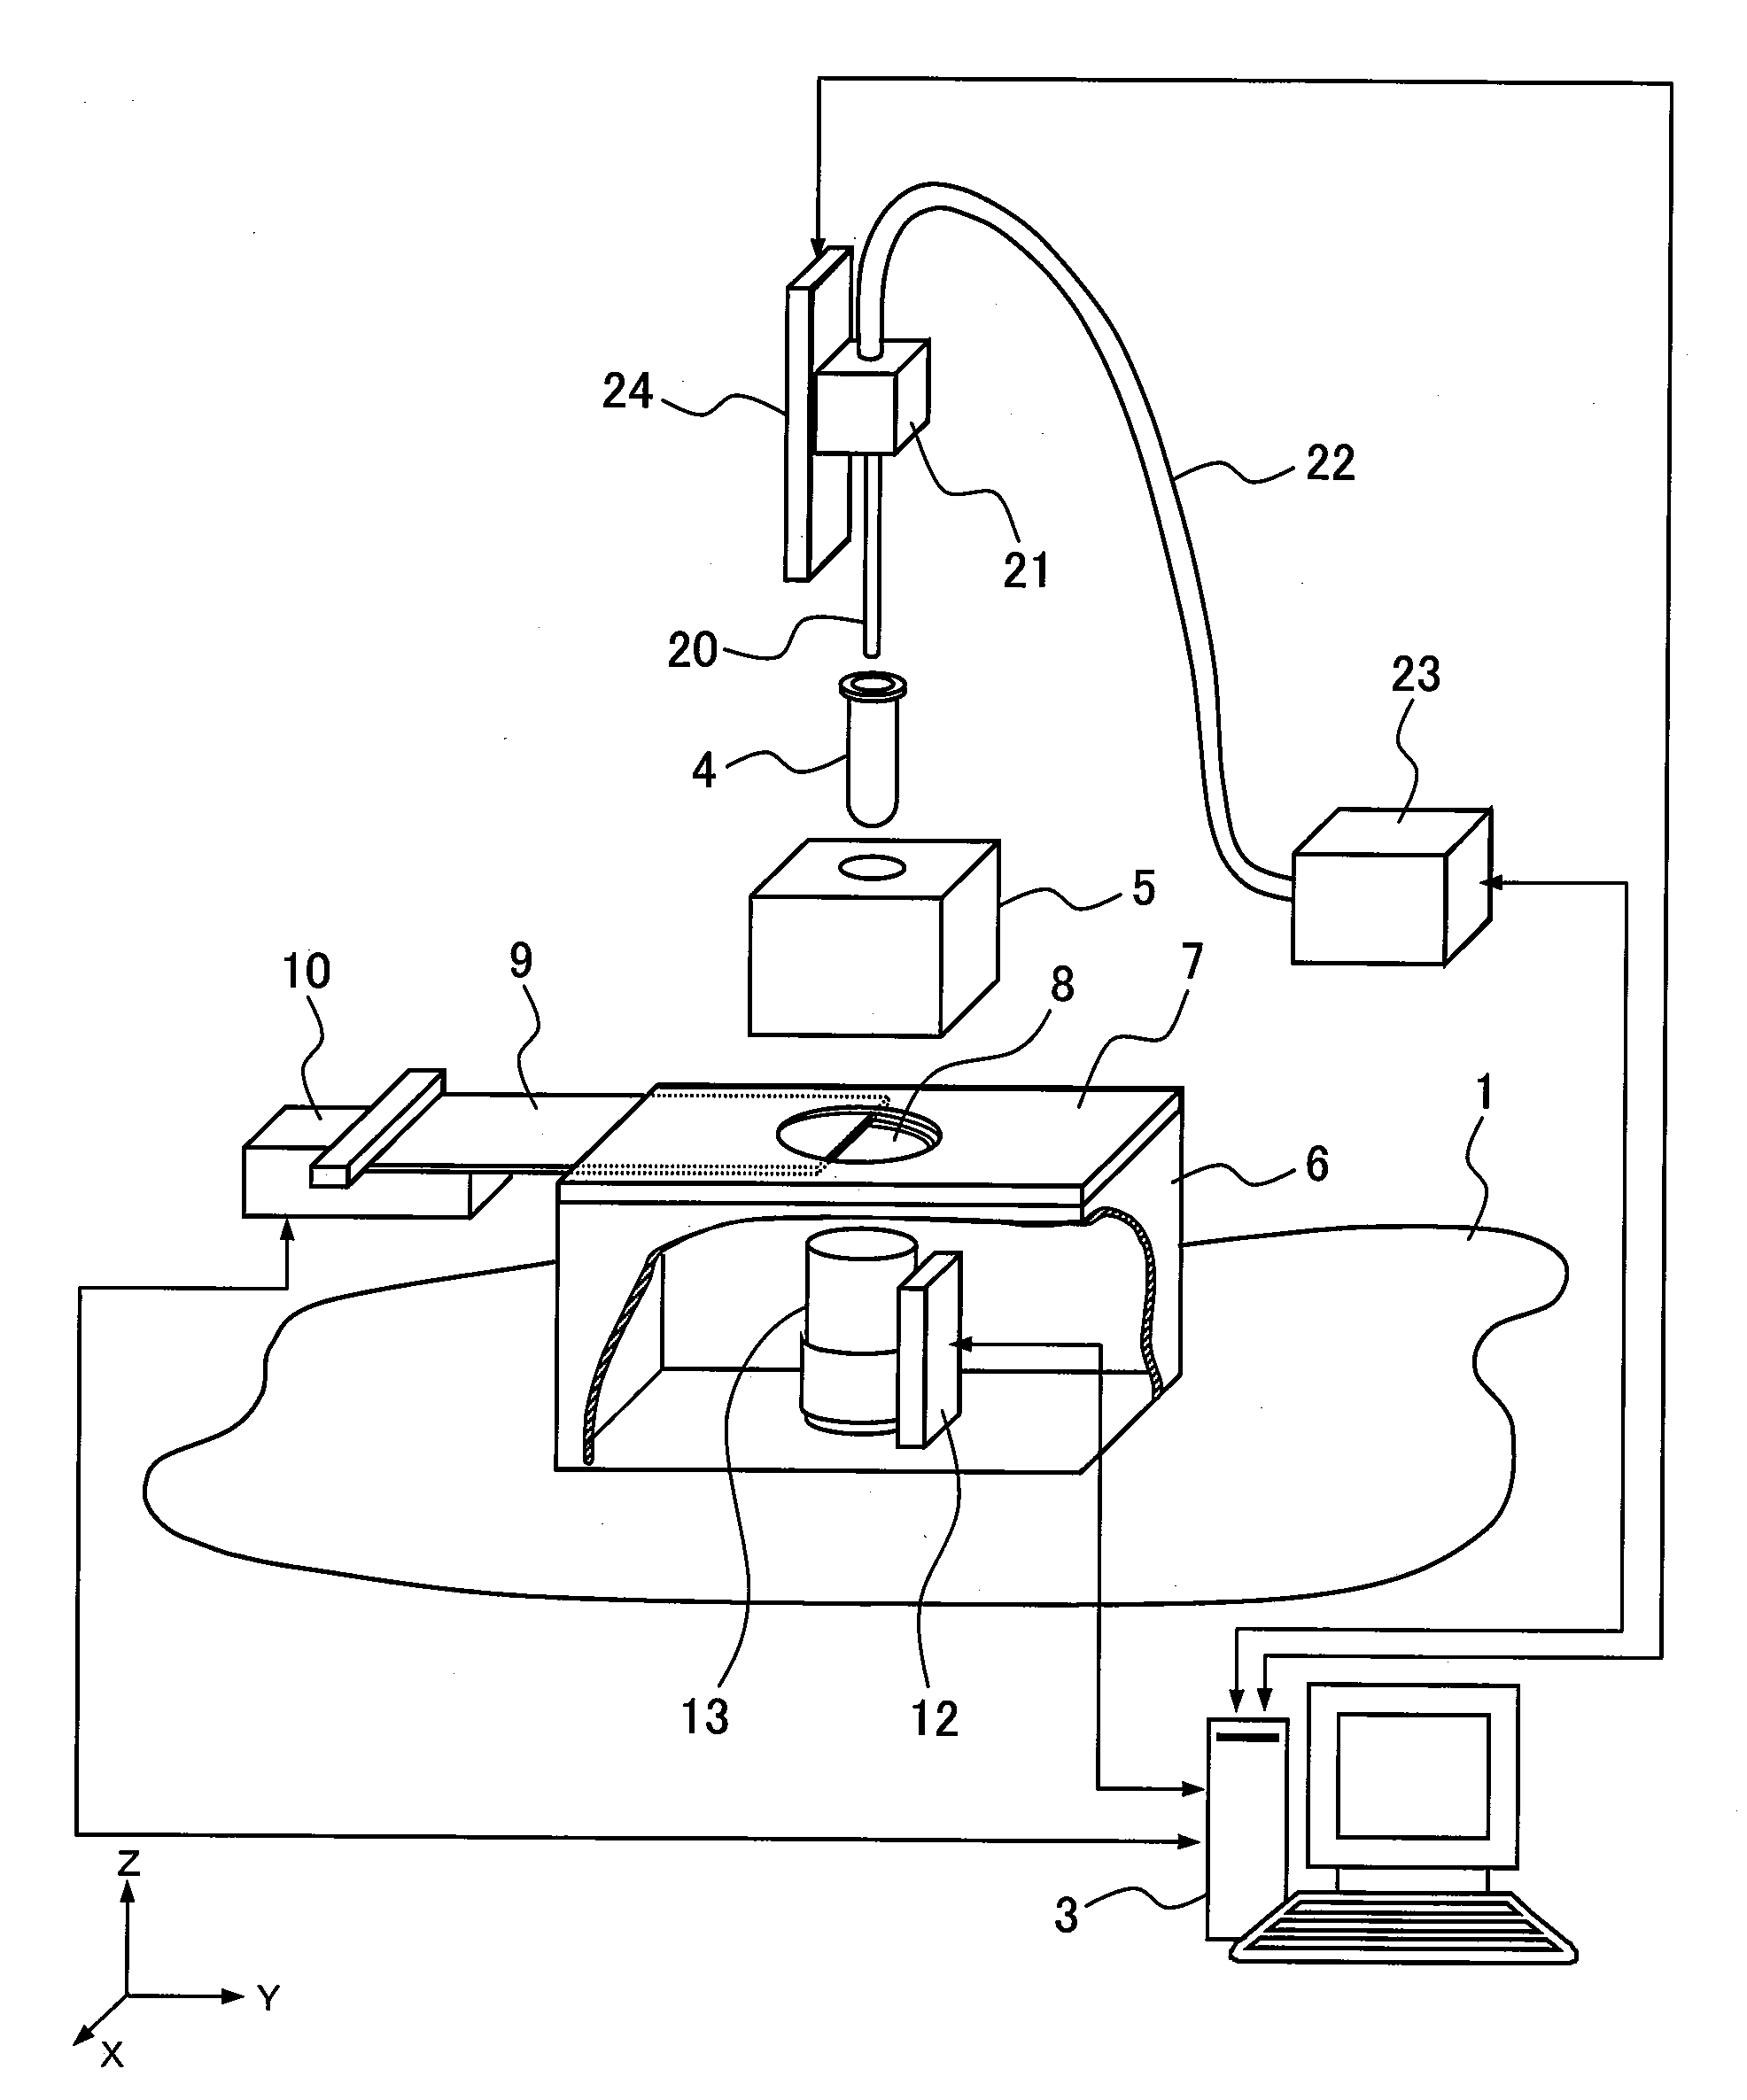 Apparatus for chemiluminescent assay and detection